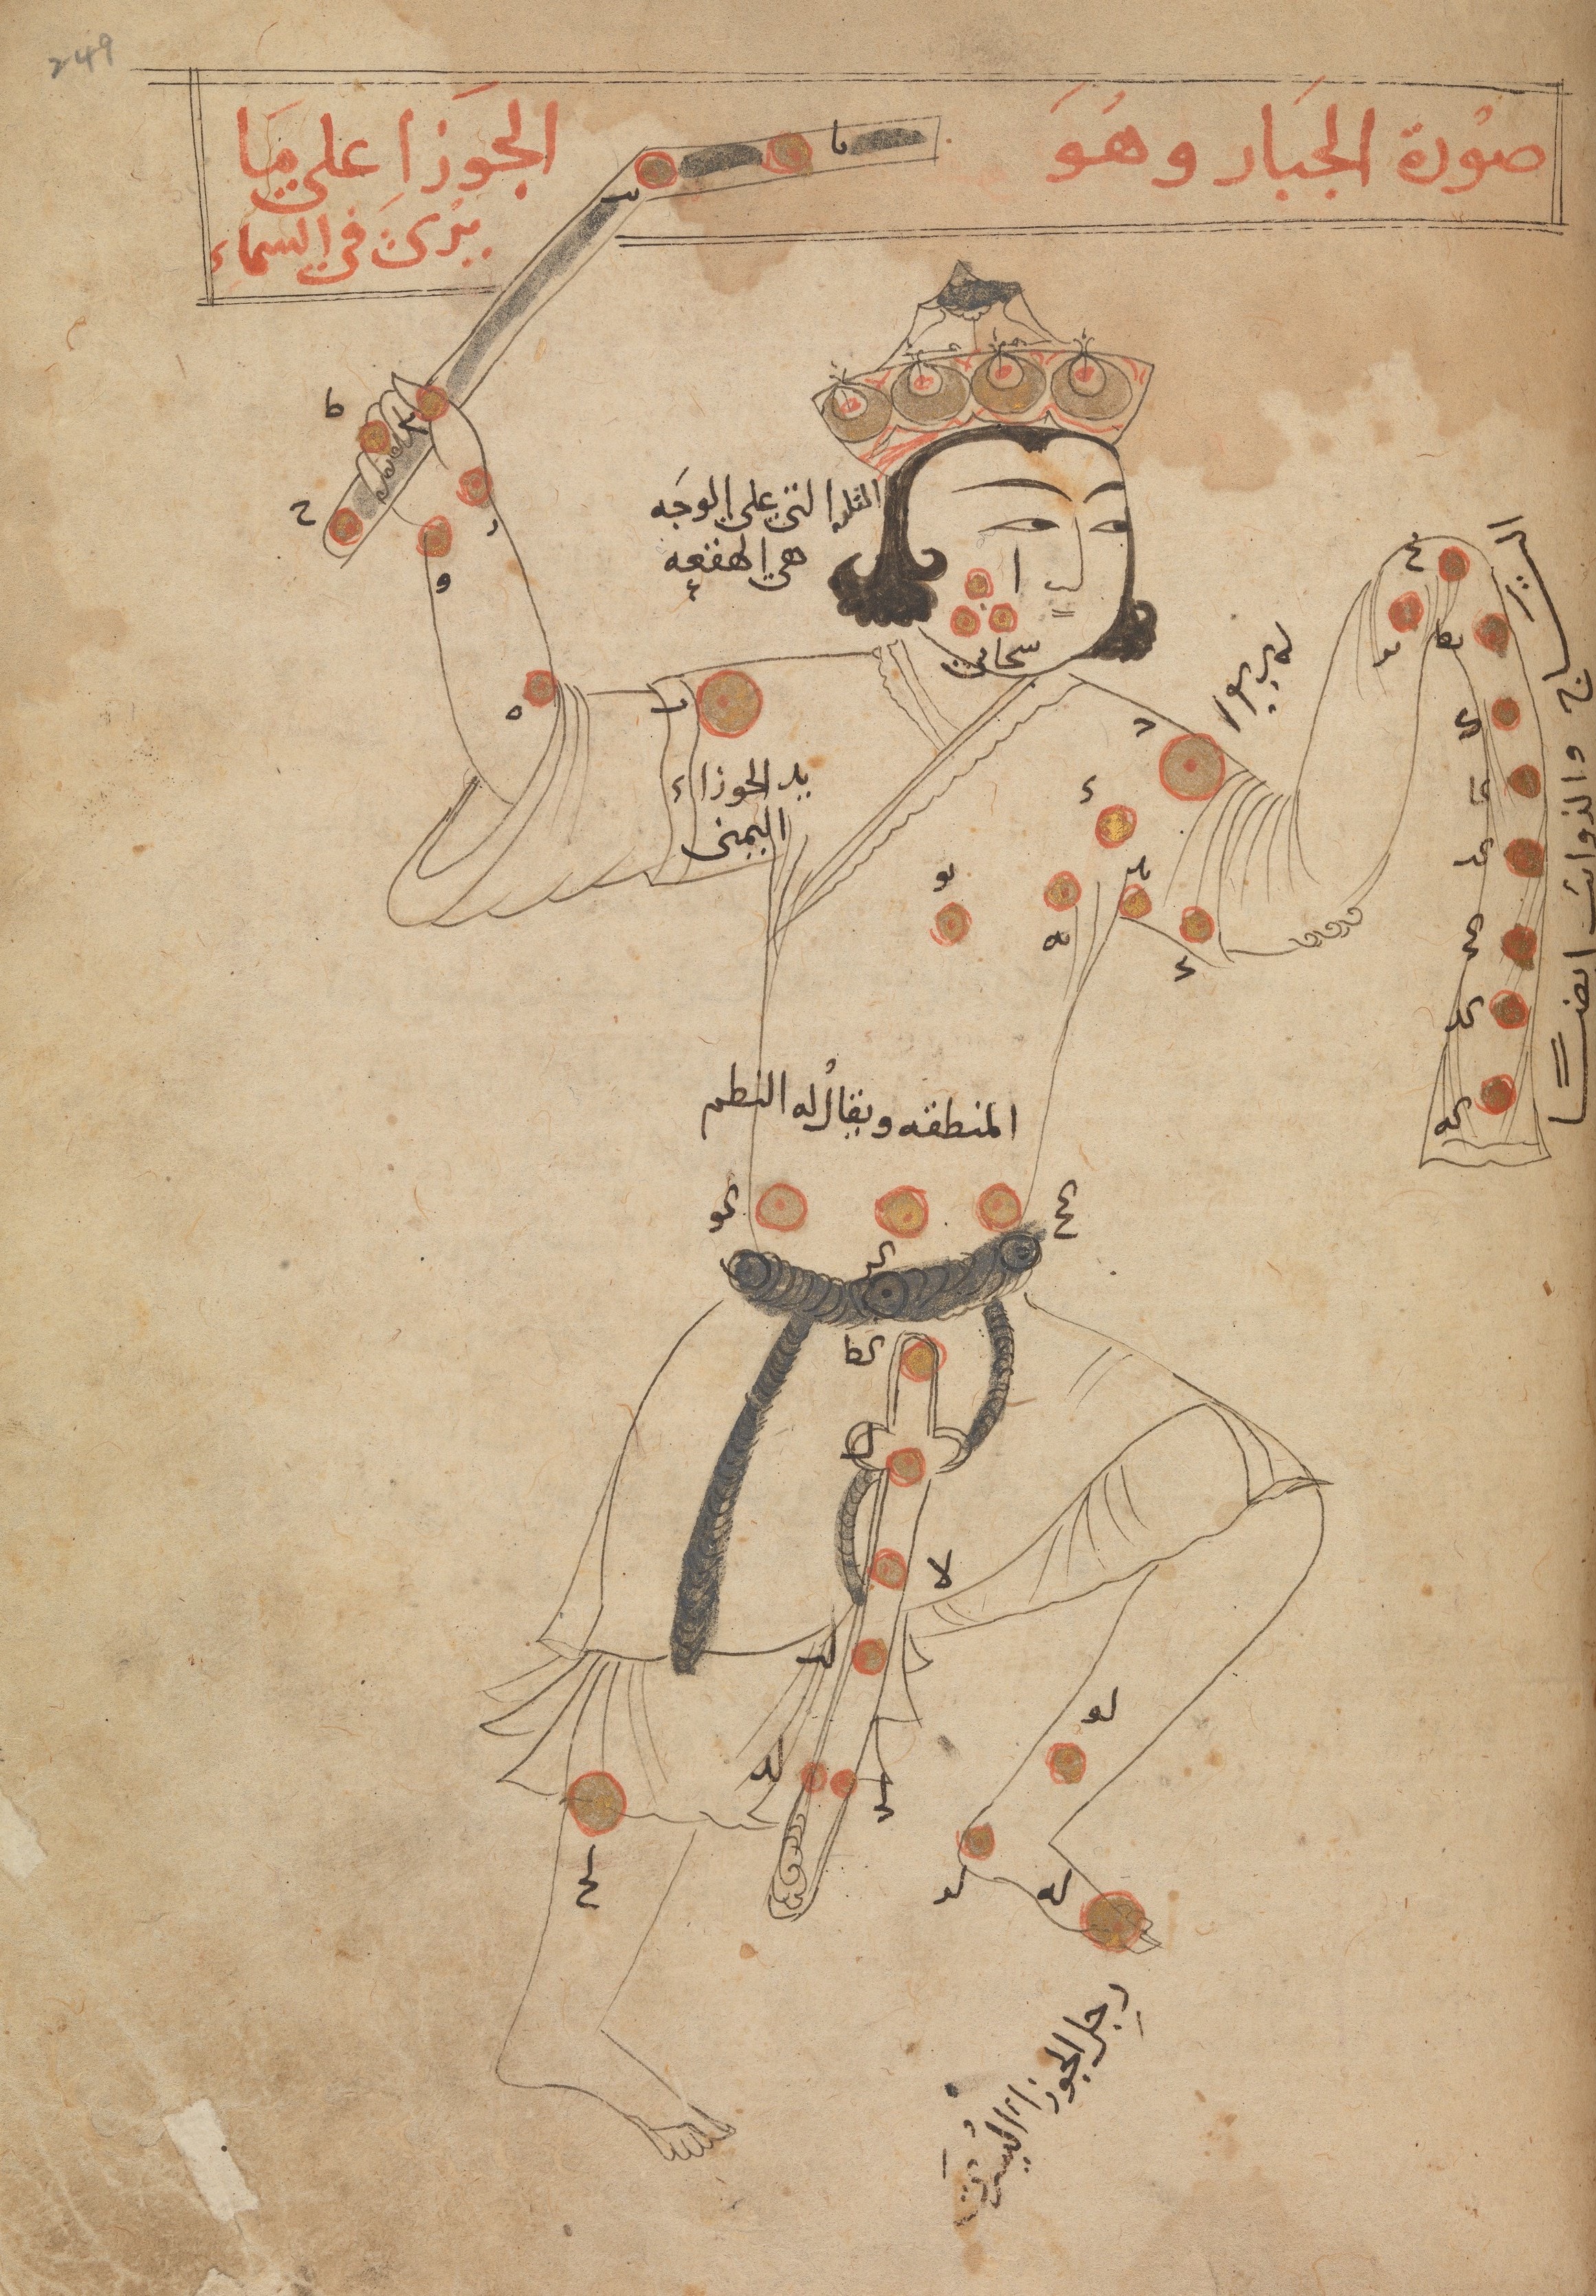 Constellation illustration of a man with a sword